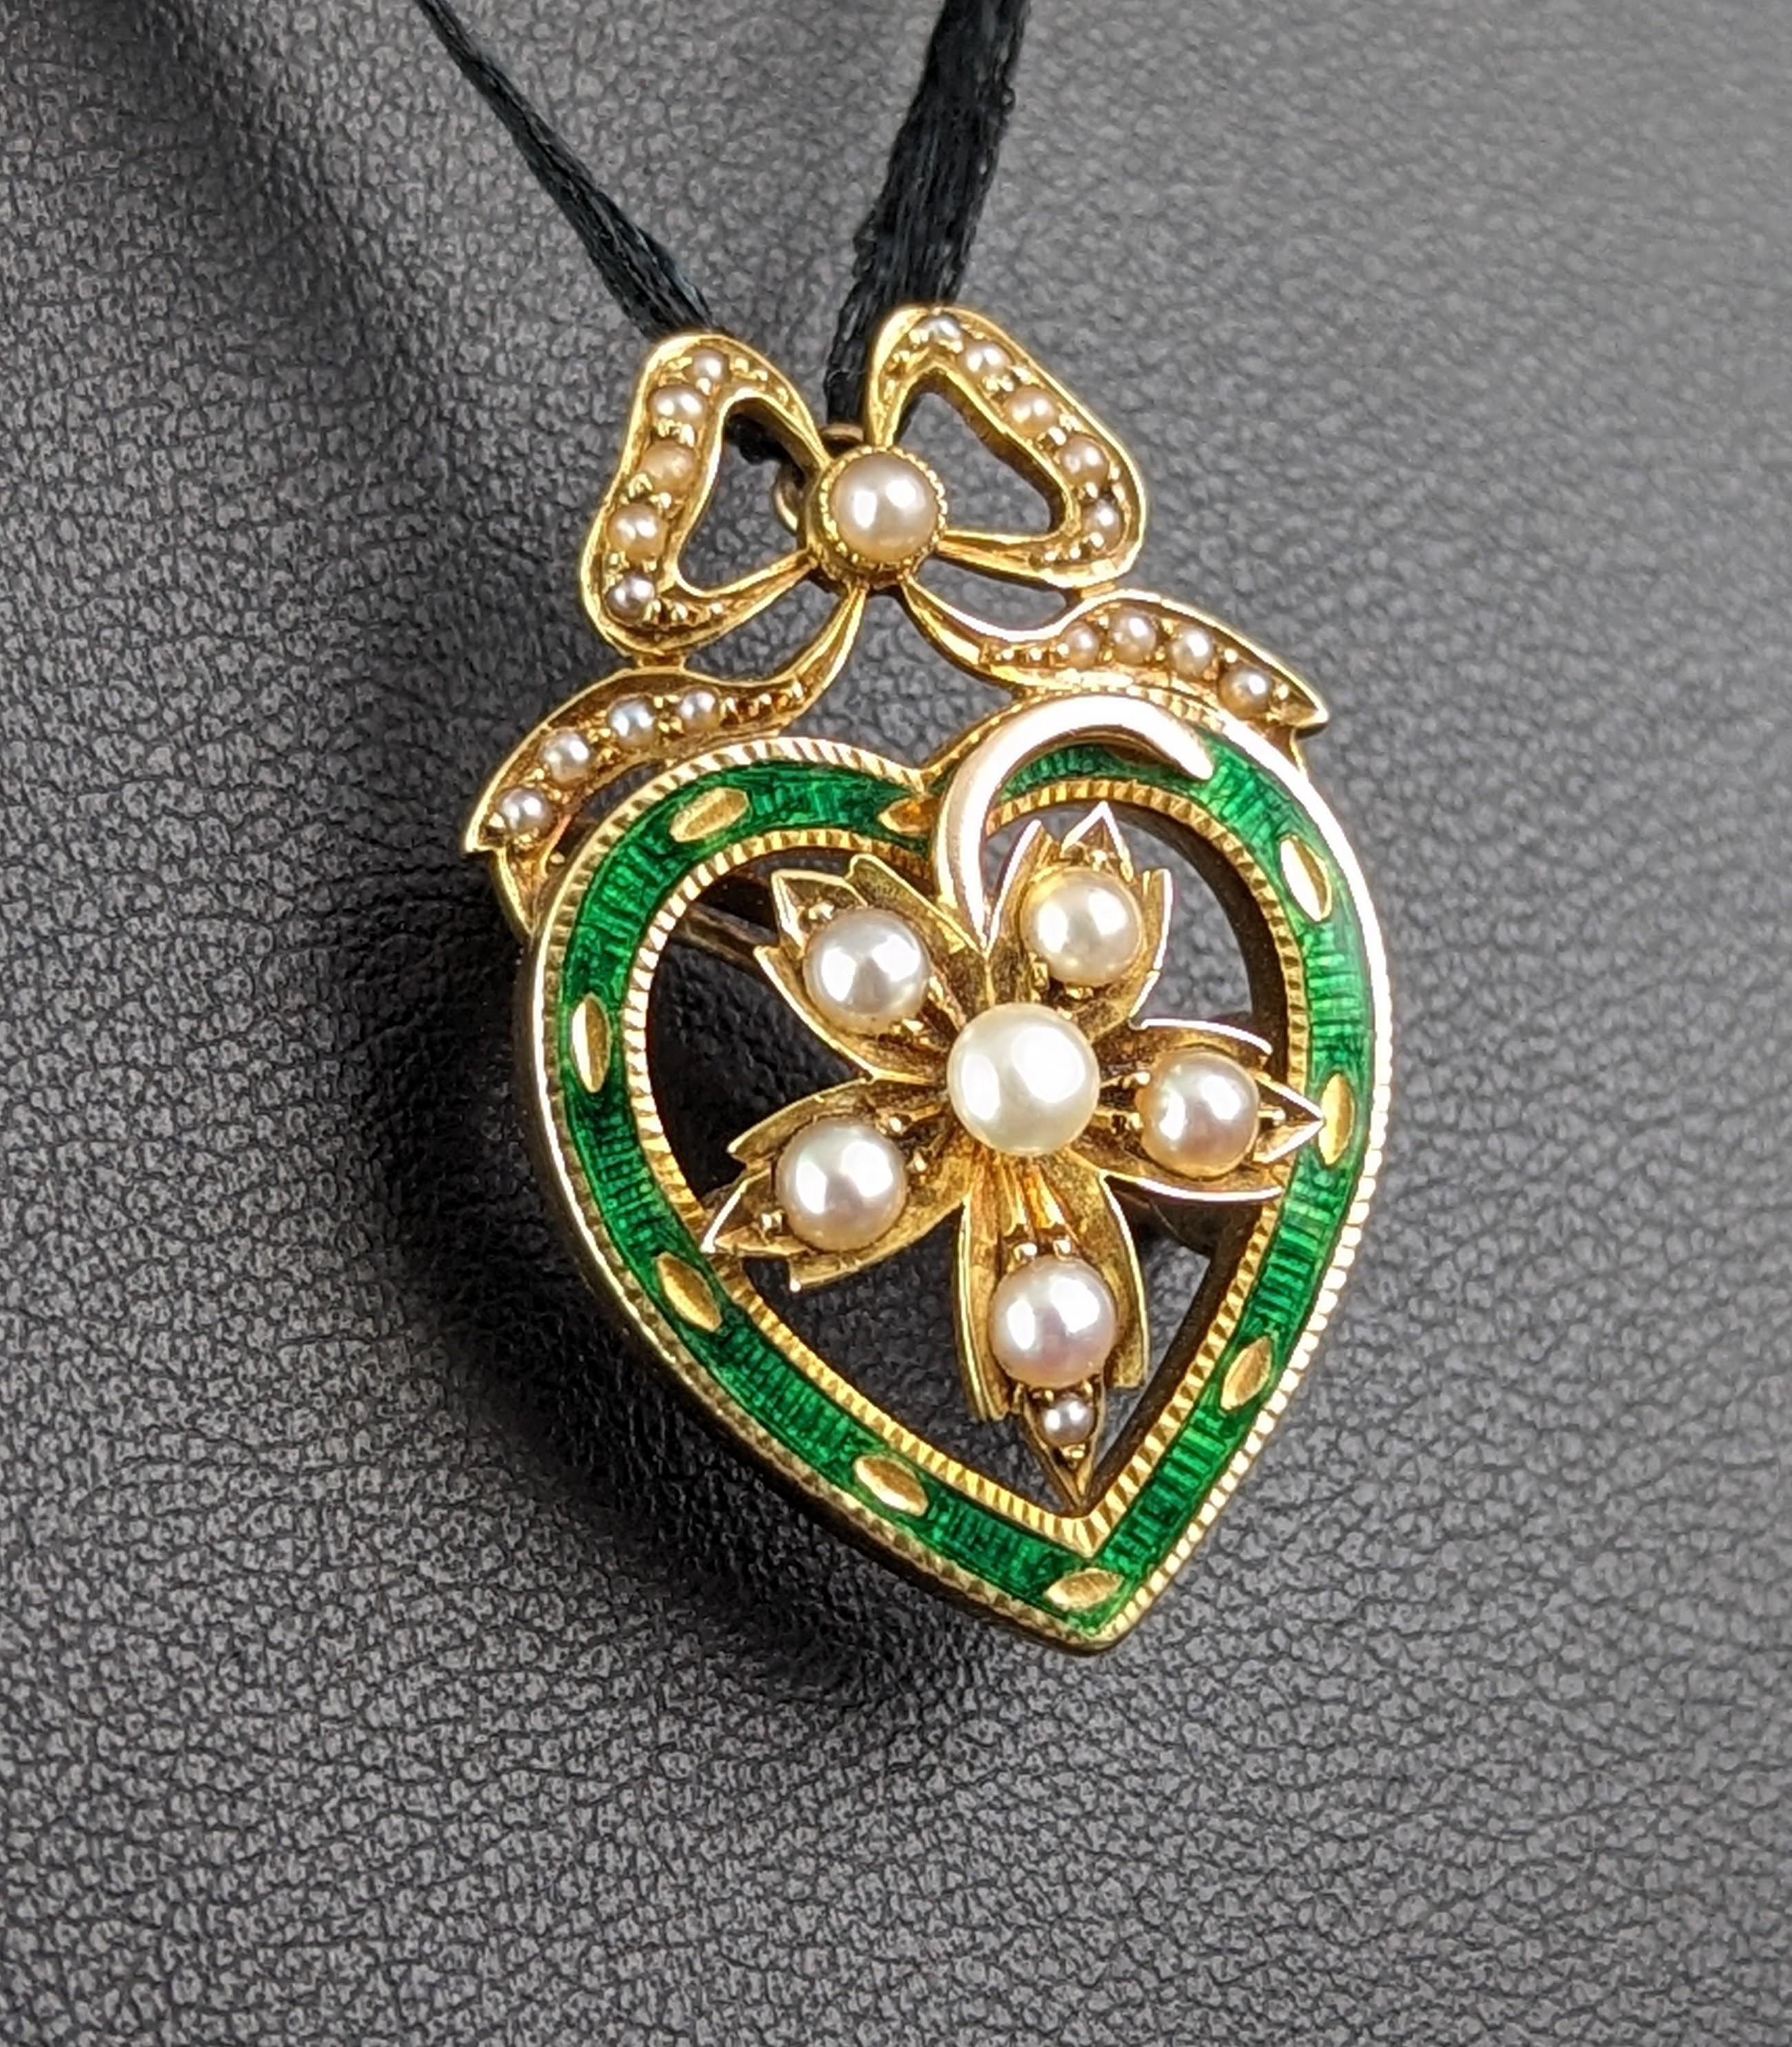 Antique Green Enamel and Pearl Heart pendant brooch, 9k yellow gold  For Sale 4